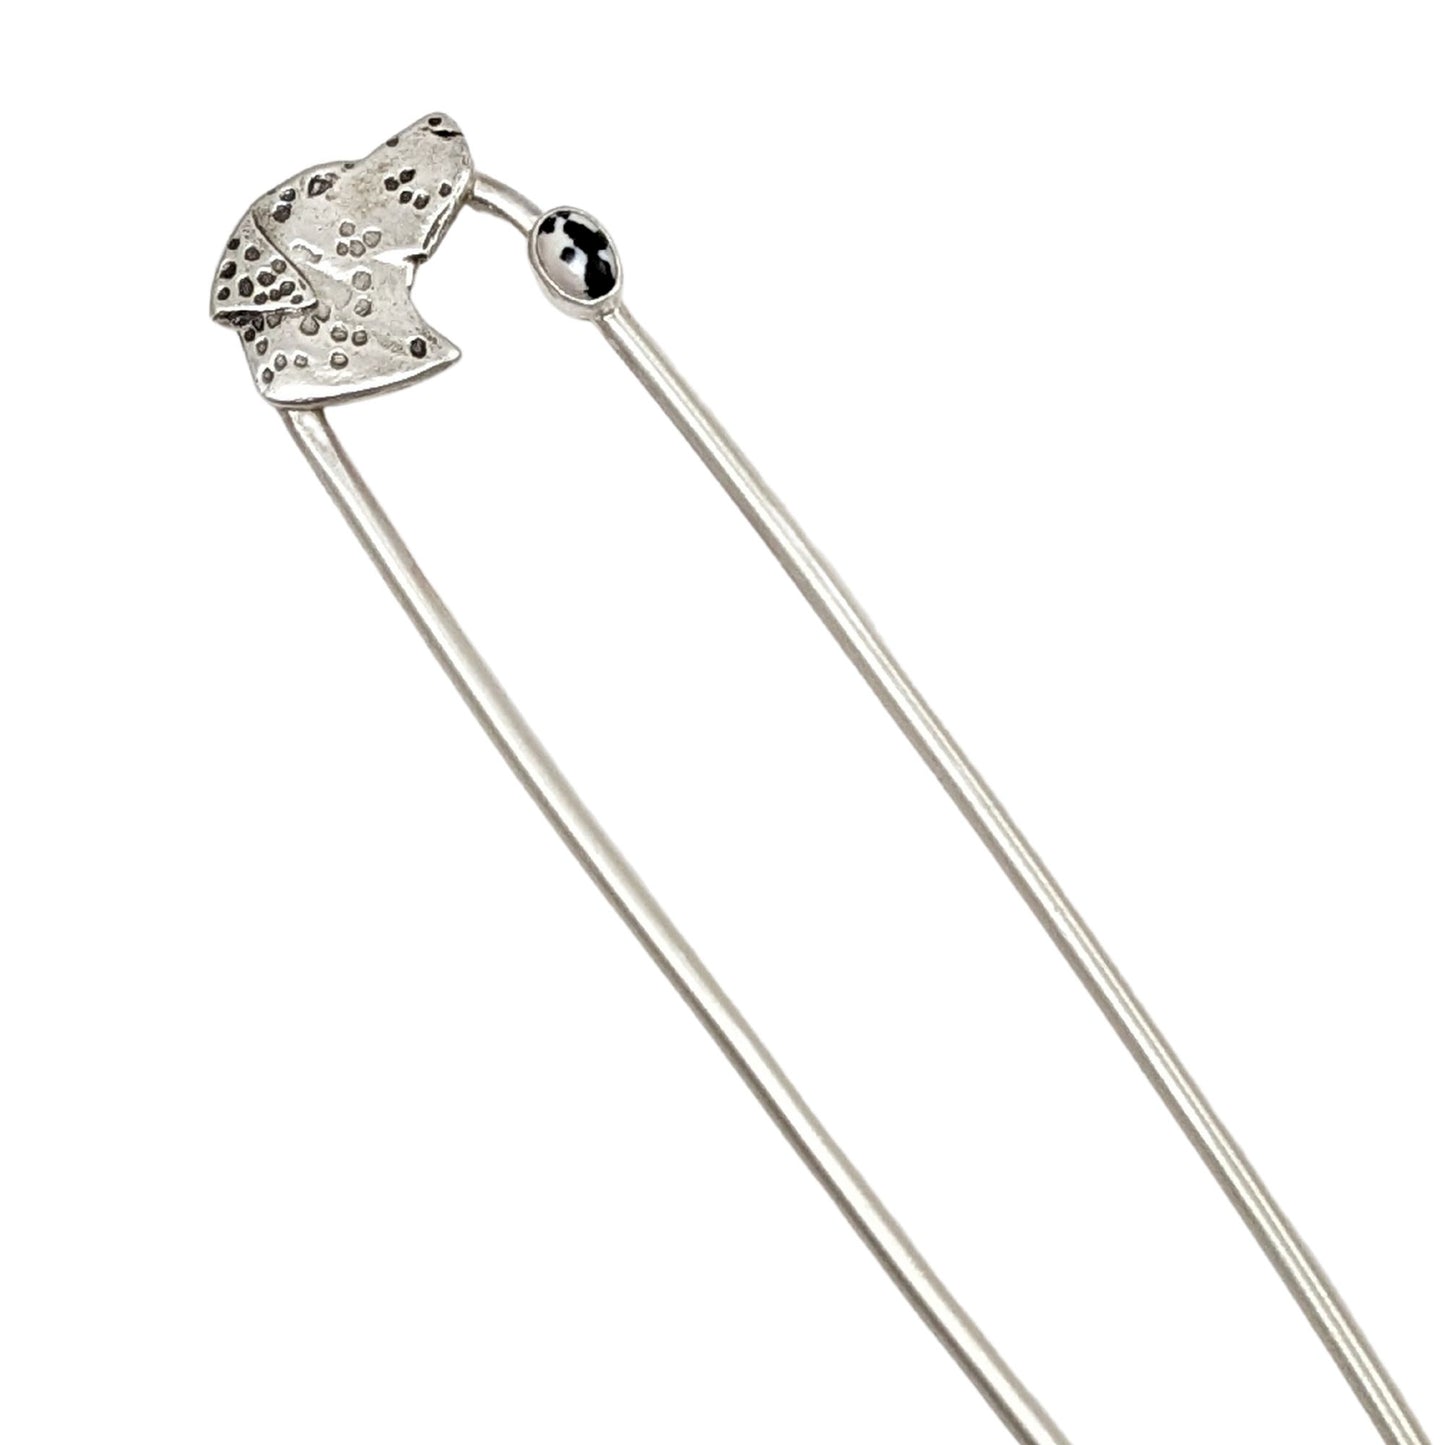 Sterling silver hair fork. Design is a profile of a dalmatian dog head and neck. There is a small oval black and white stone near the top of the right fork. The dalmatian spots are darkened.